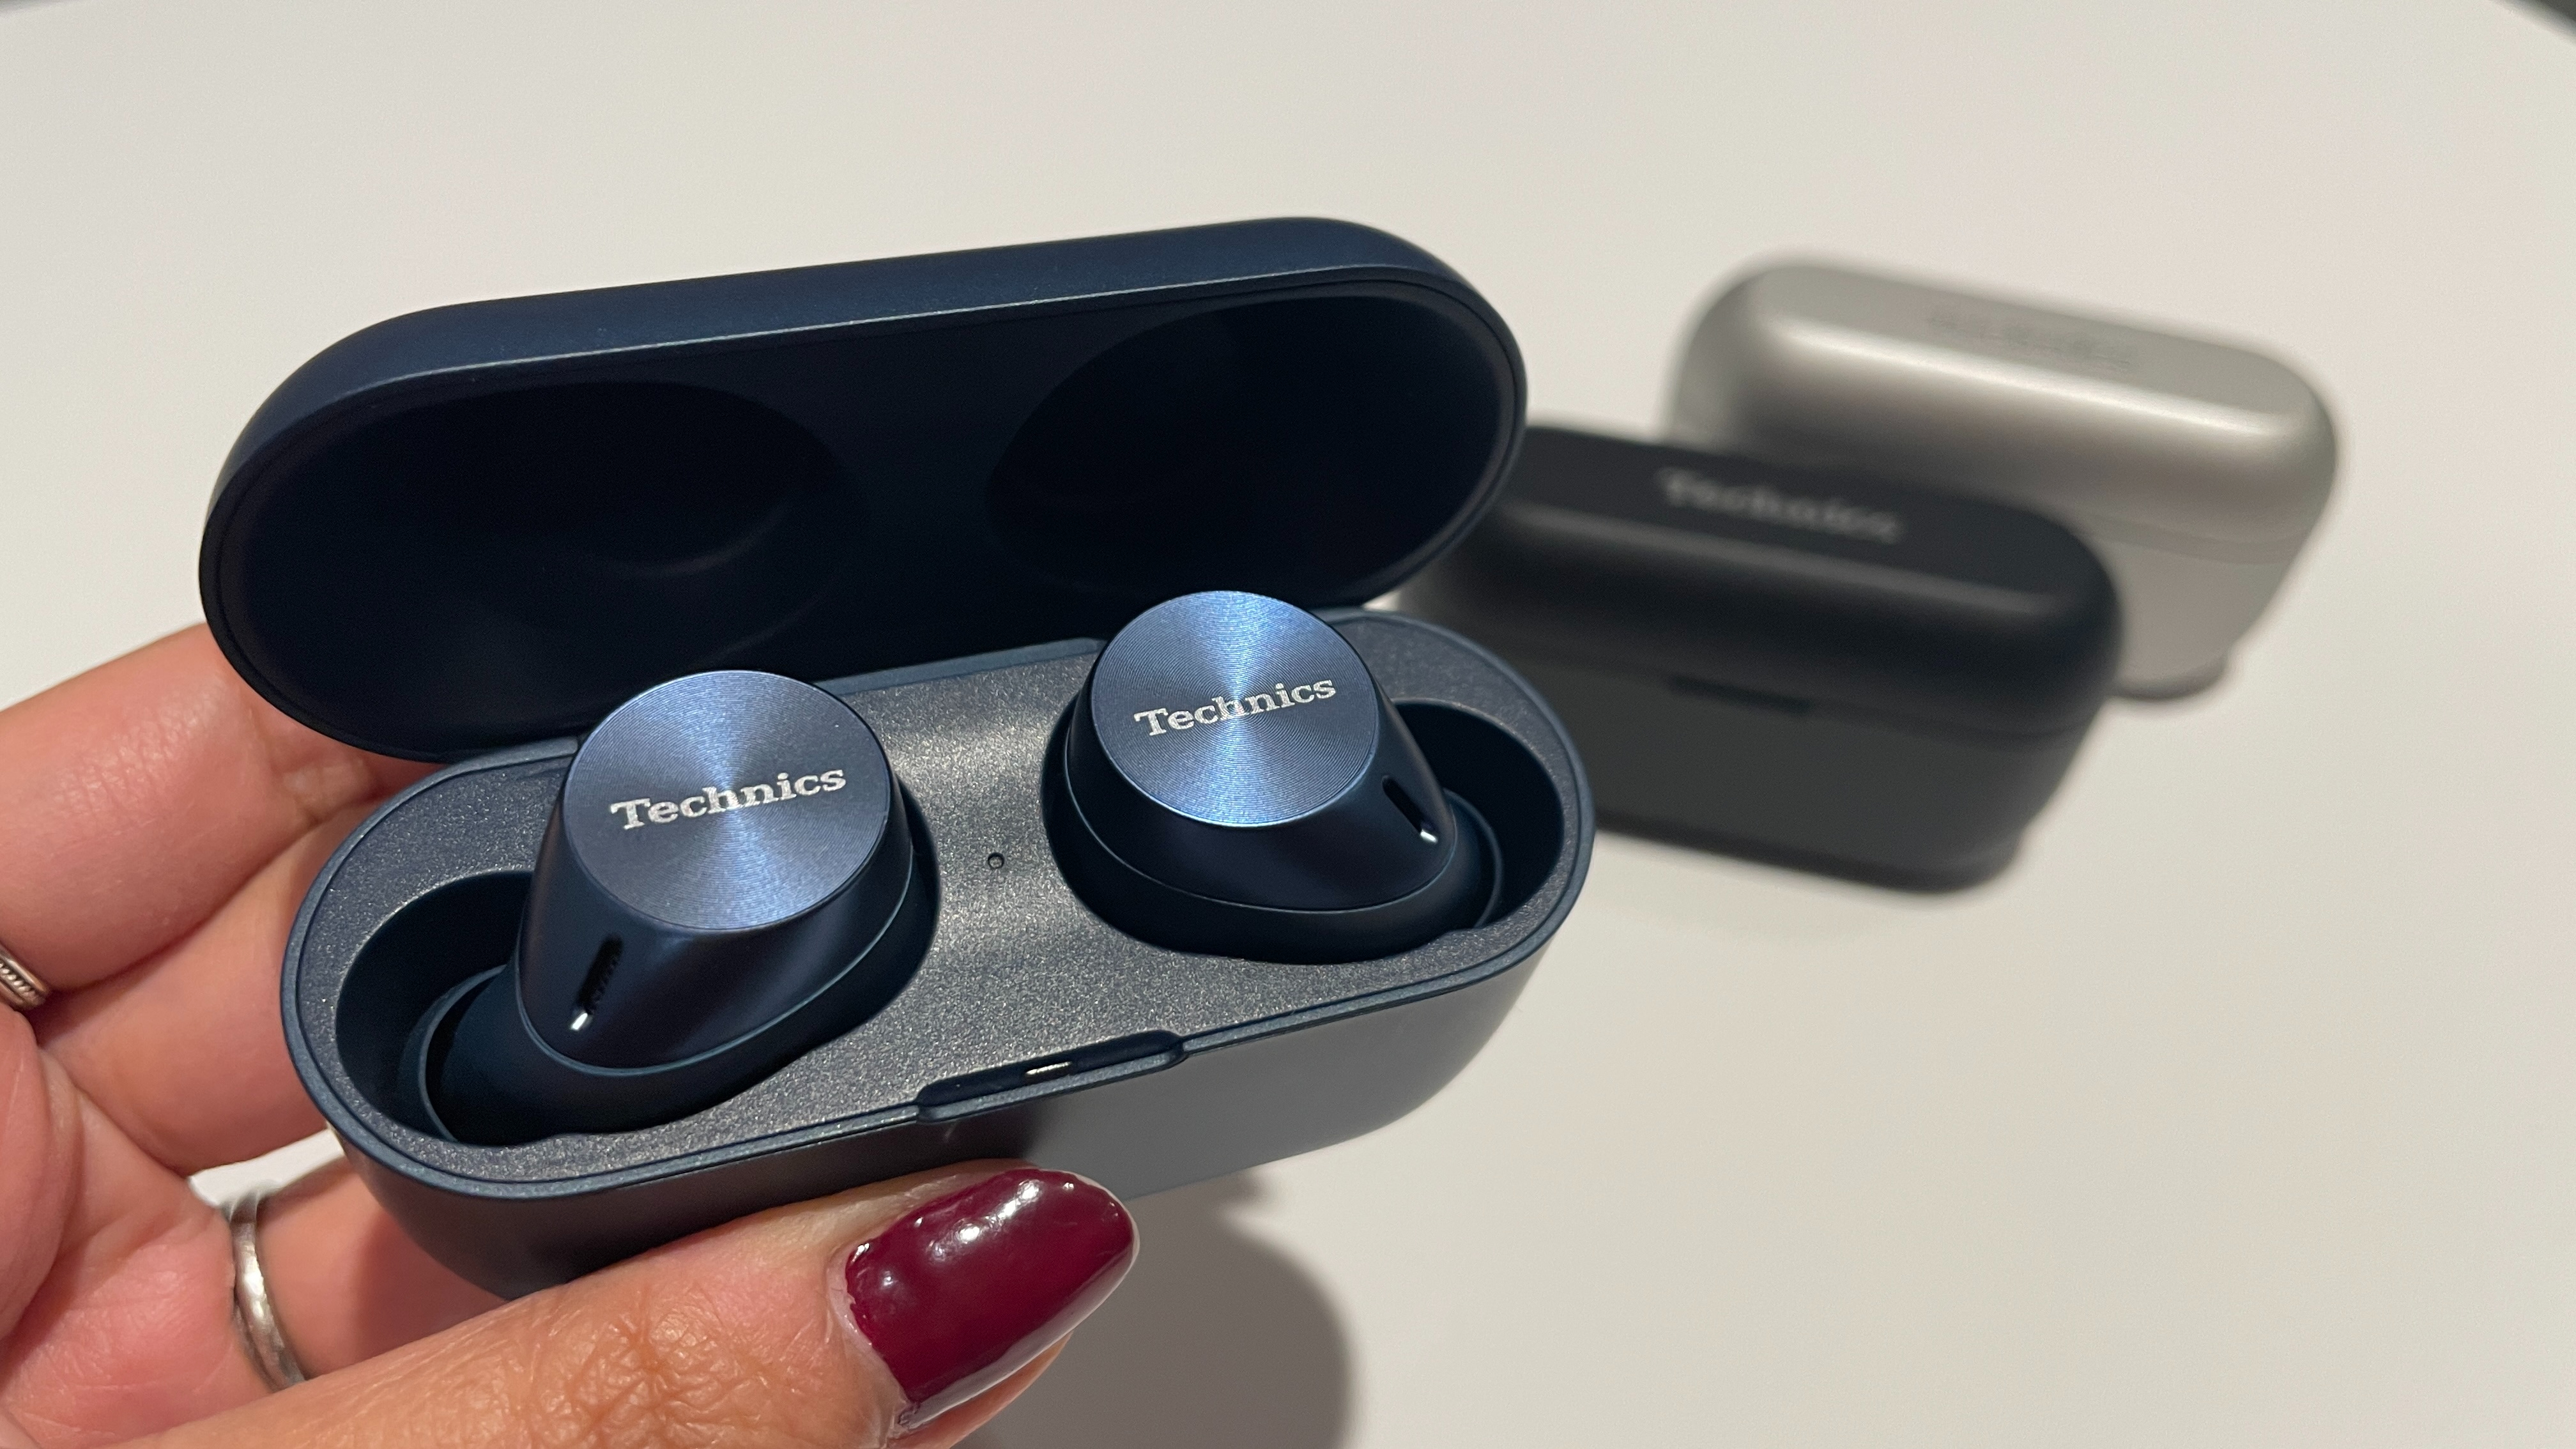 Technics Premium HiFi True Wireless Earbuds with Noise Cancelling